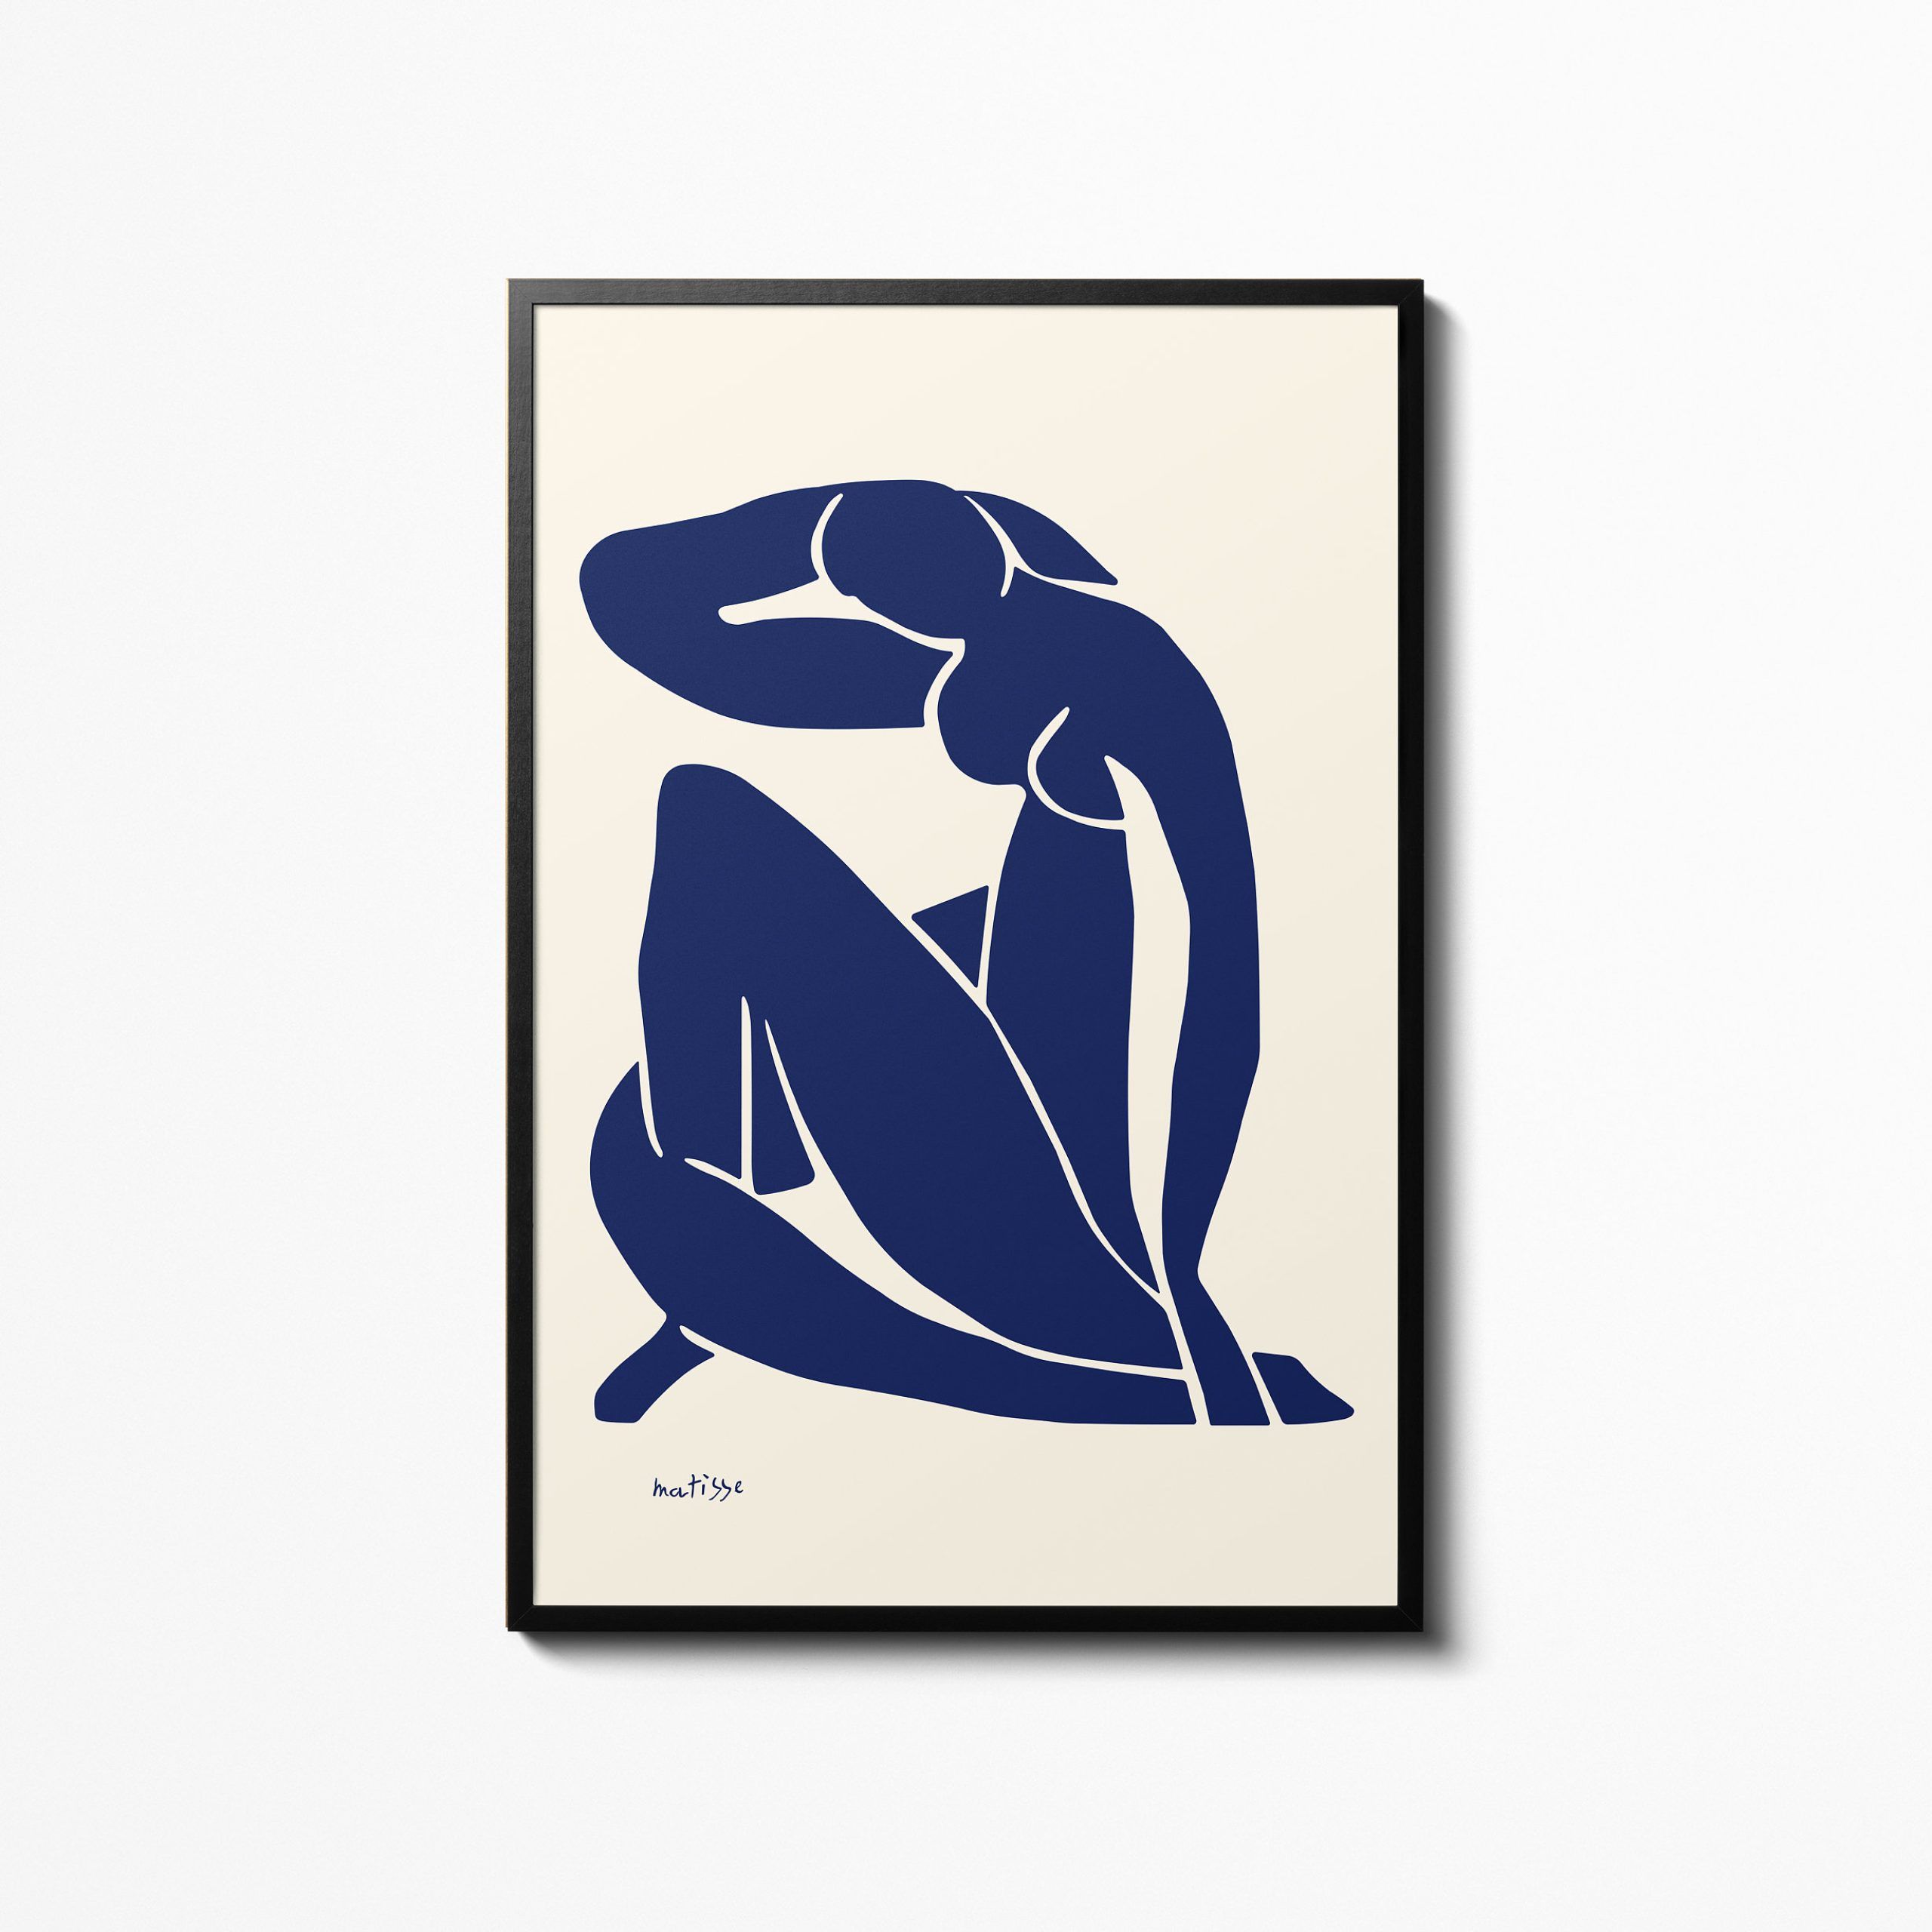 Henri Matisse Blue Nude Poster Wall Art Home Decor Vintage – Etsy With Regard To Blue Nude Wall Art (View 9 of 15)